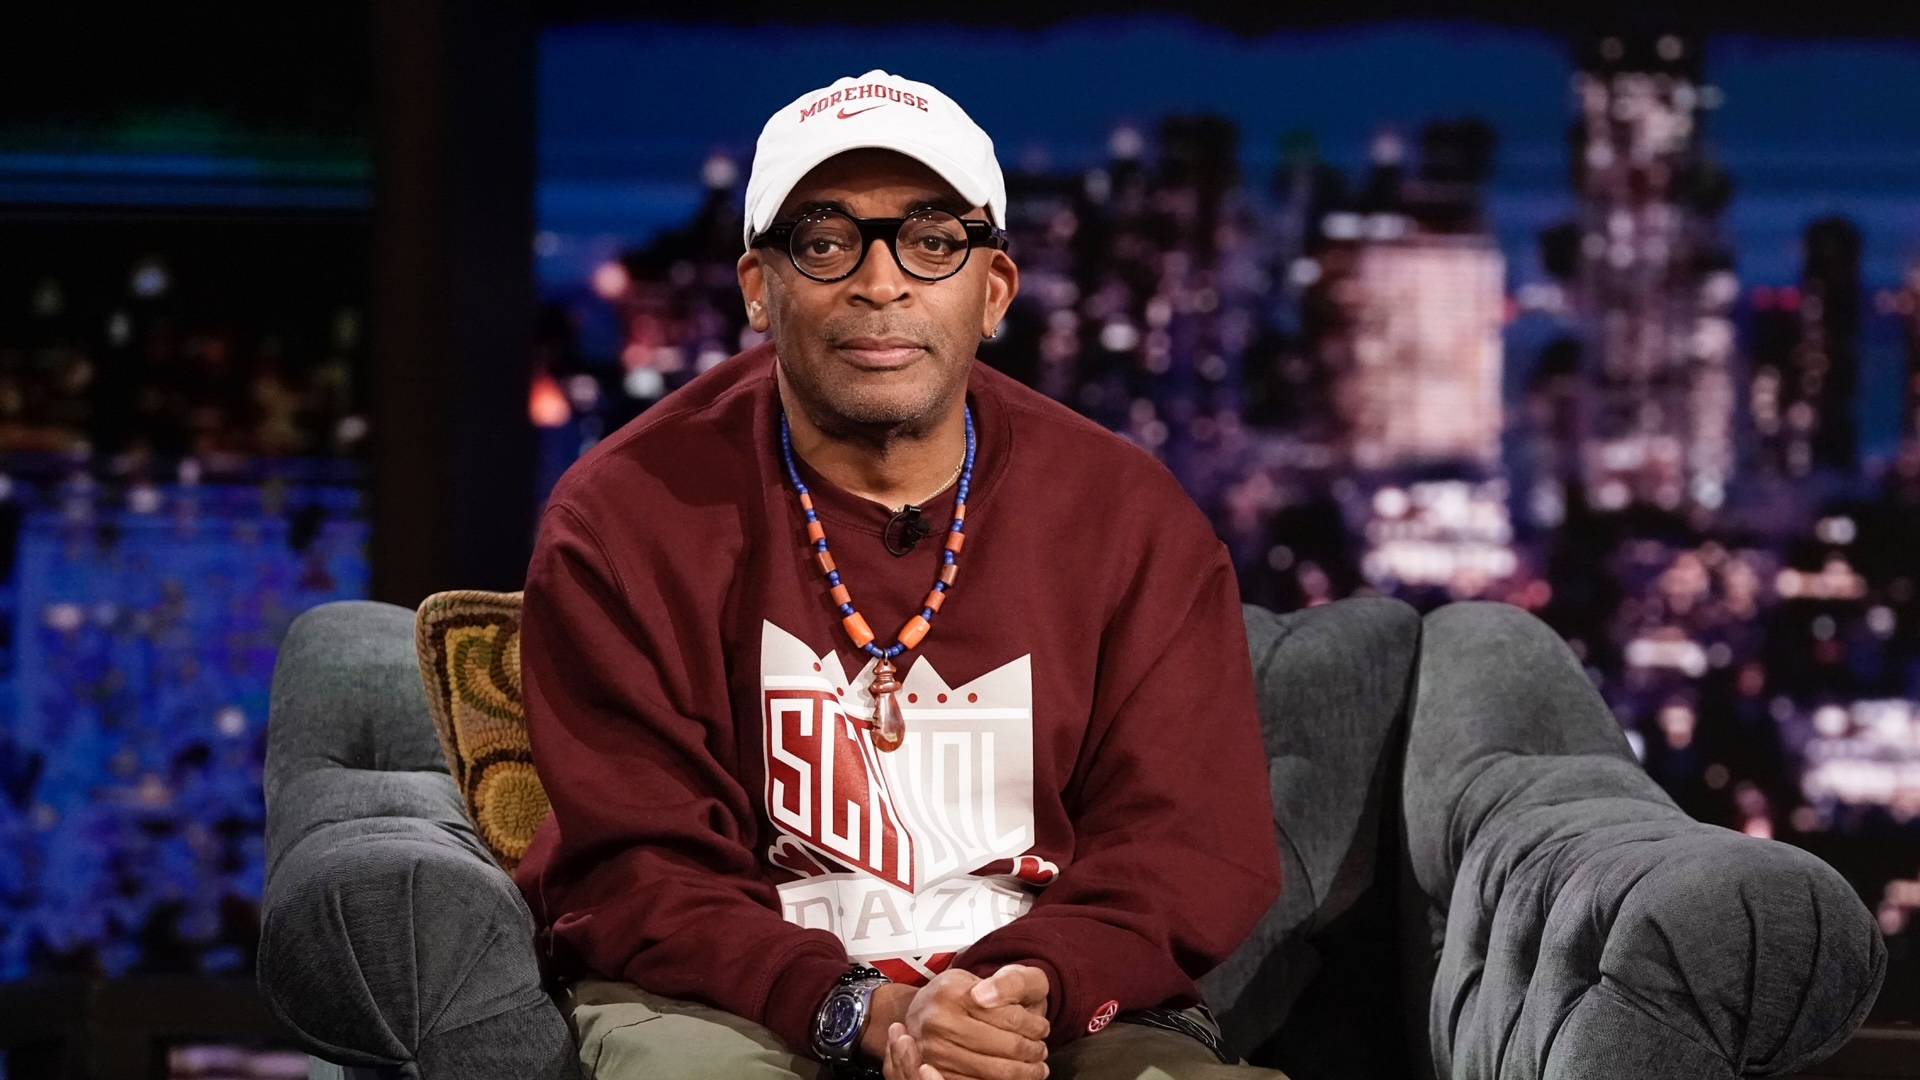 Spike Lee on BET Buzz 2021.